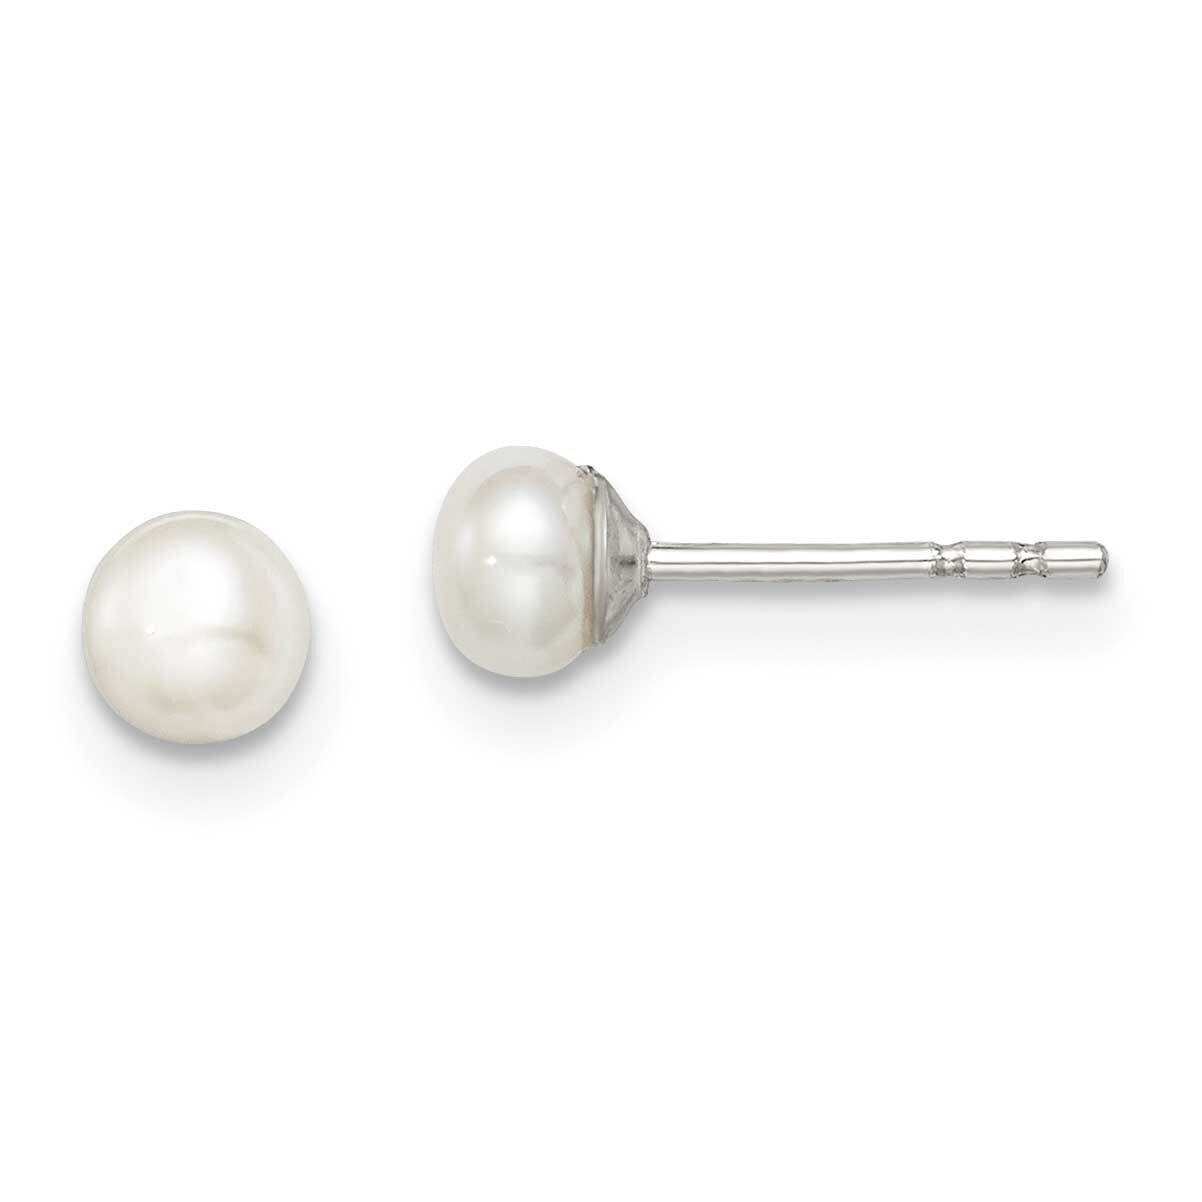 3-4mm White Fw Cultured Button Pearl Stud Earring Sterling Silver Rhodium-plated QE12697